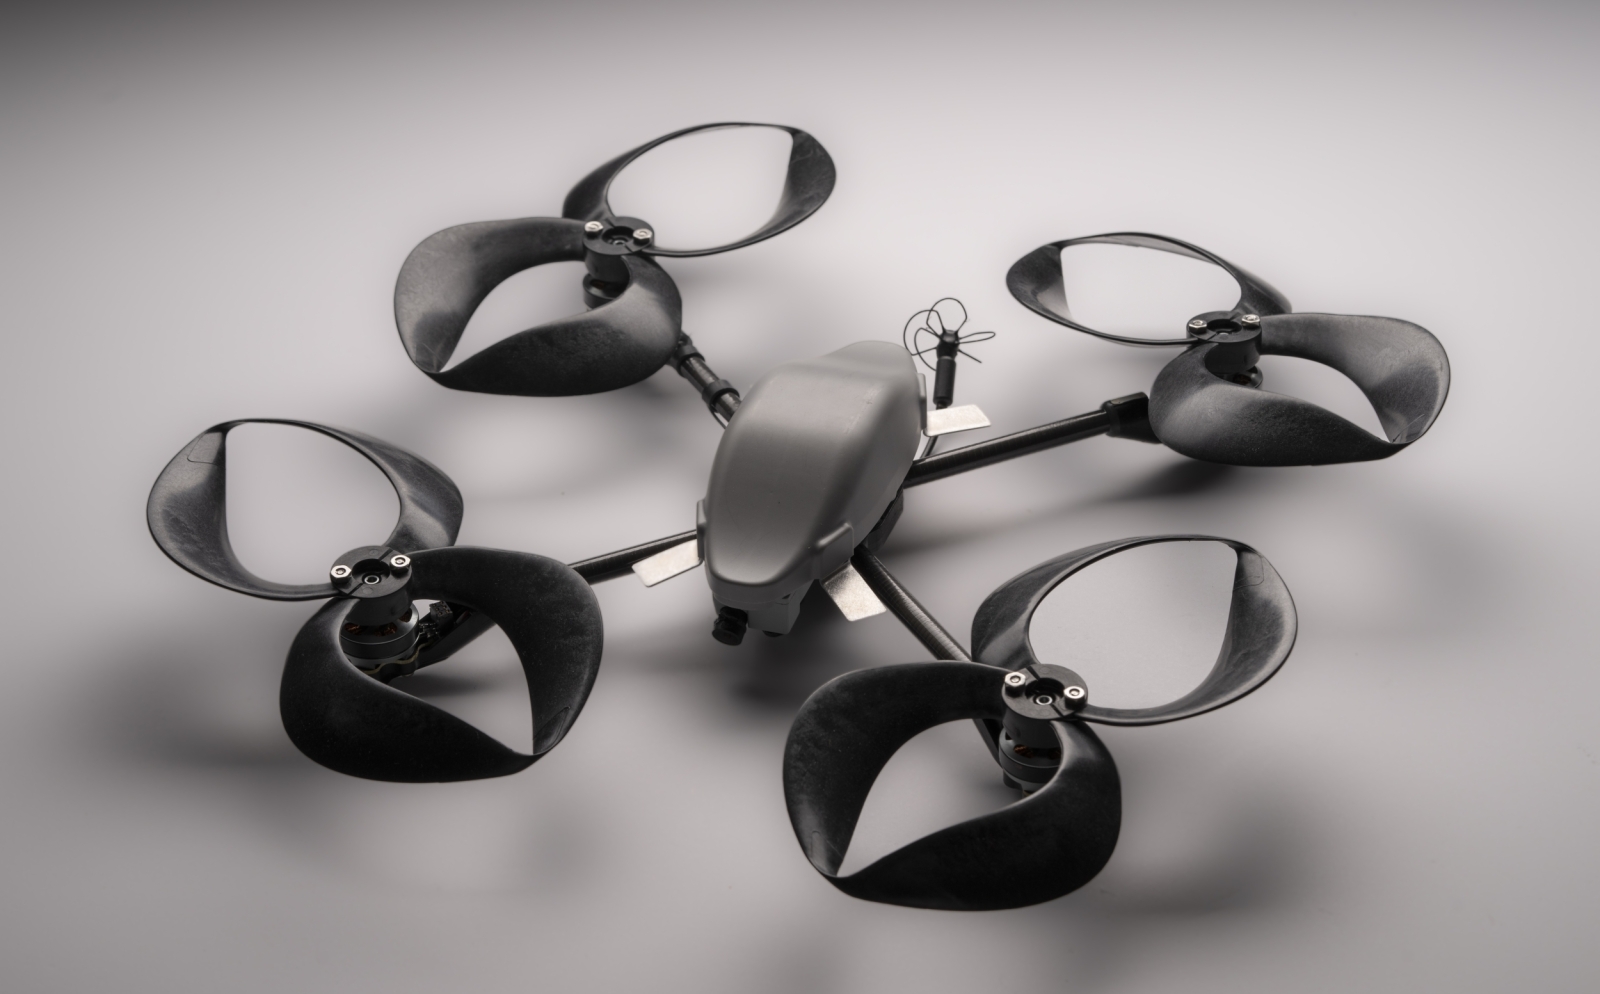 A small commercial drone outfitted with four toroidal propellers (each propeller looks like two loops, made of plastic).